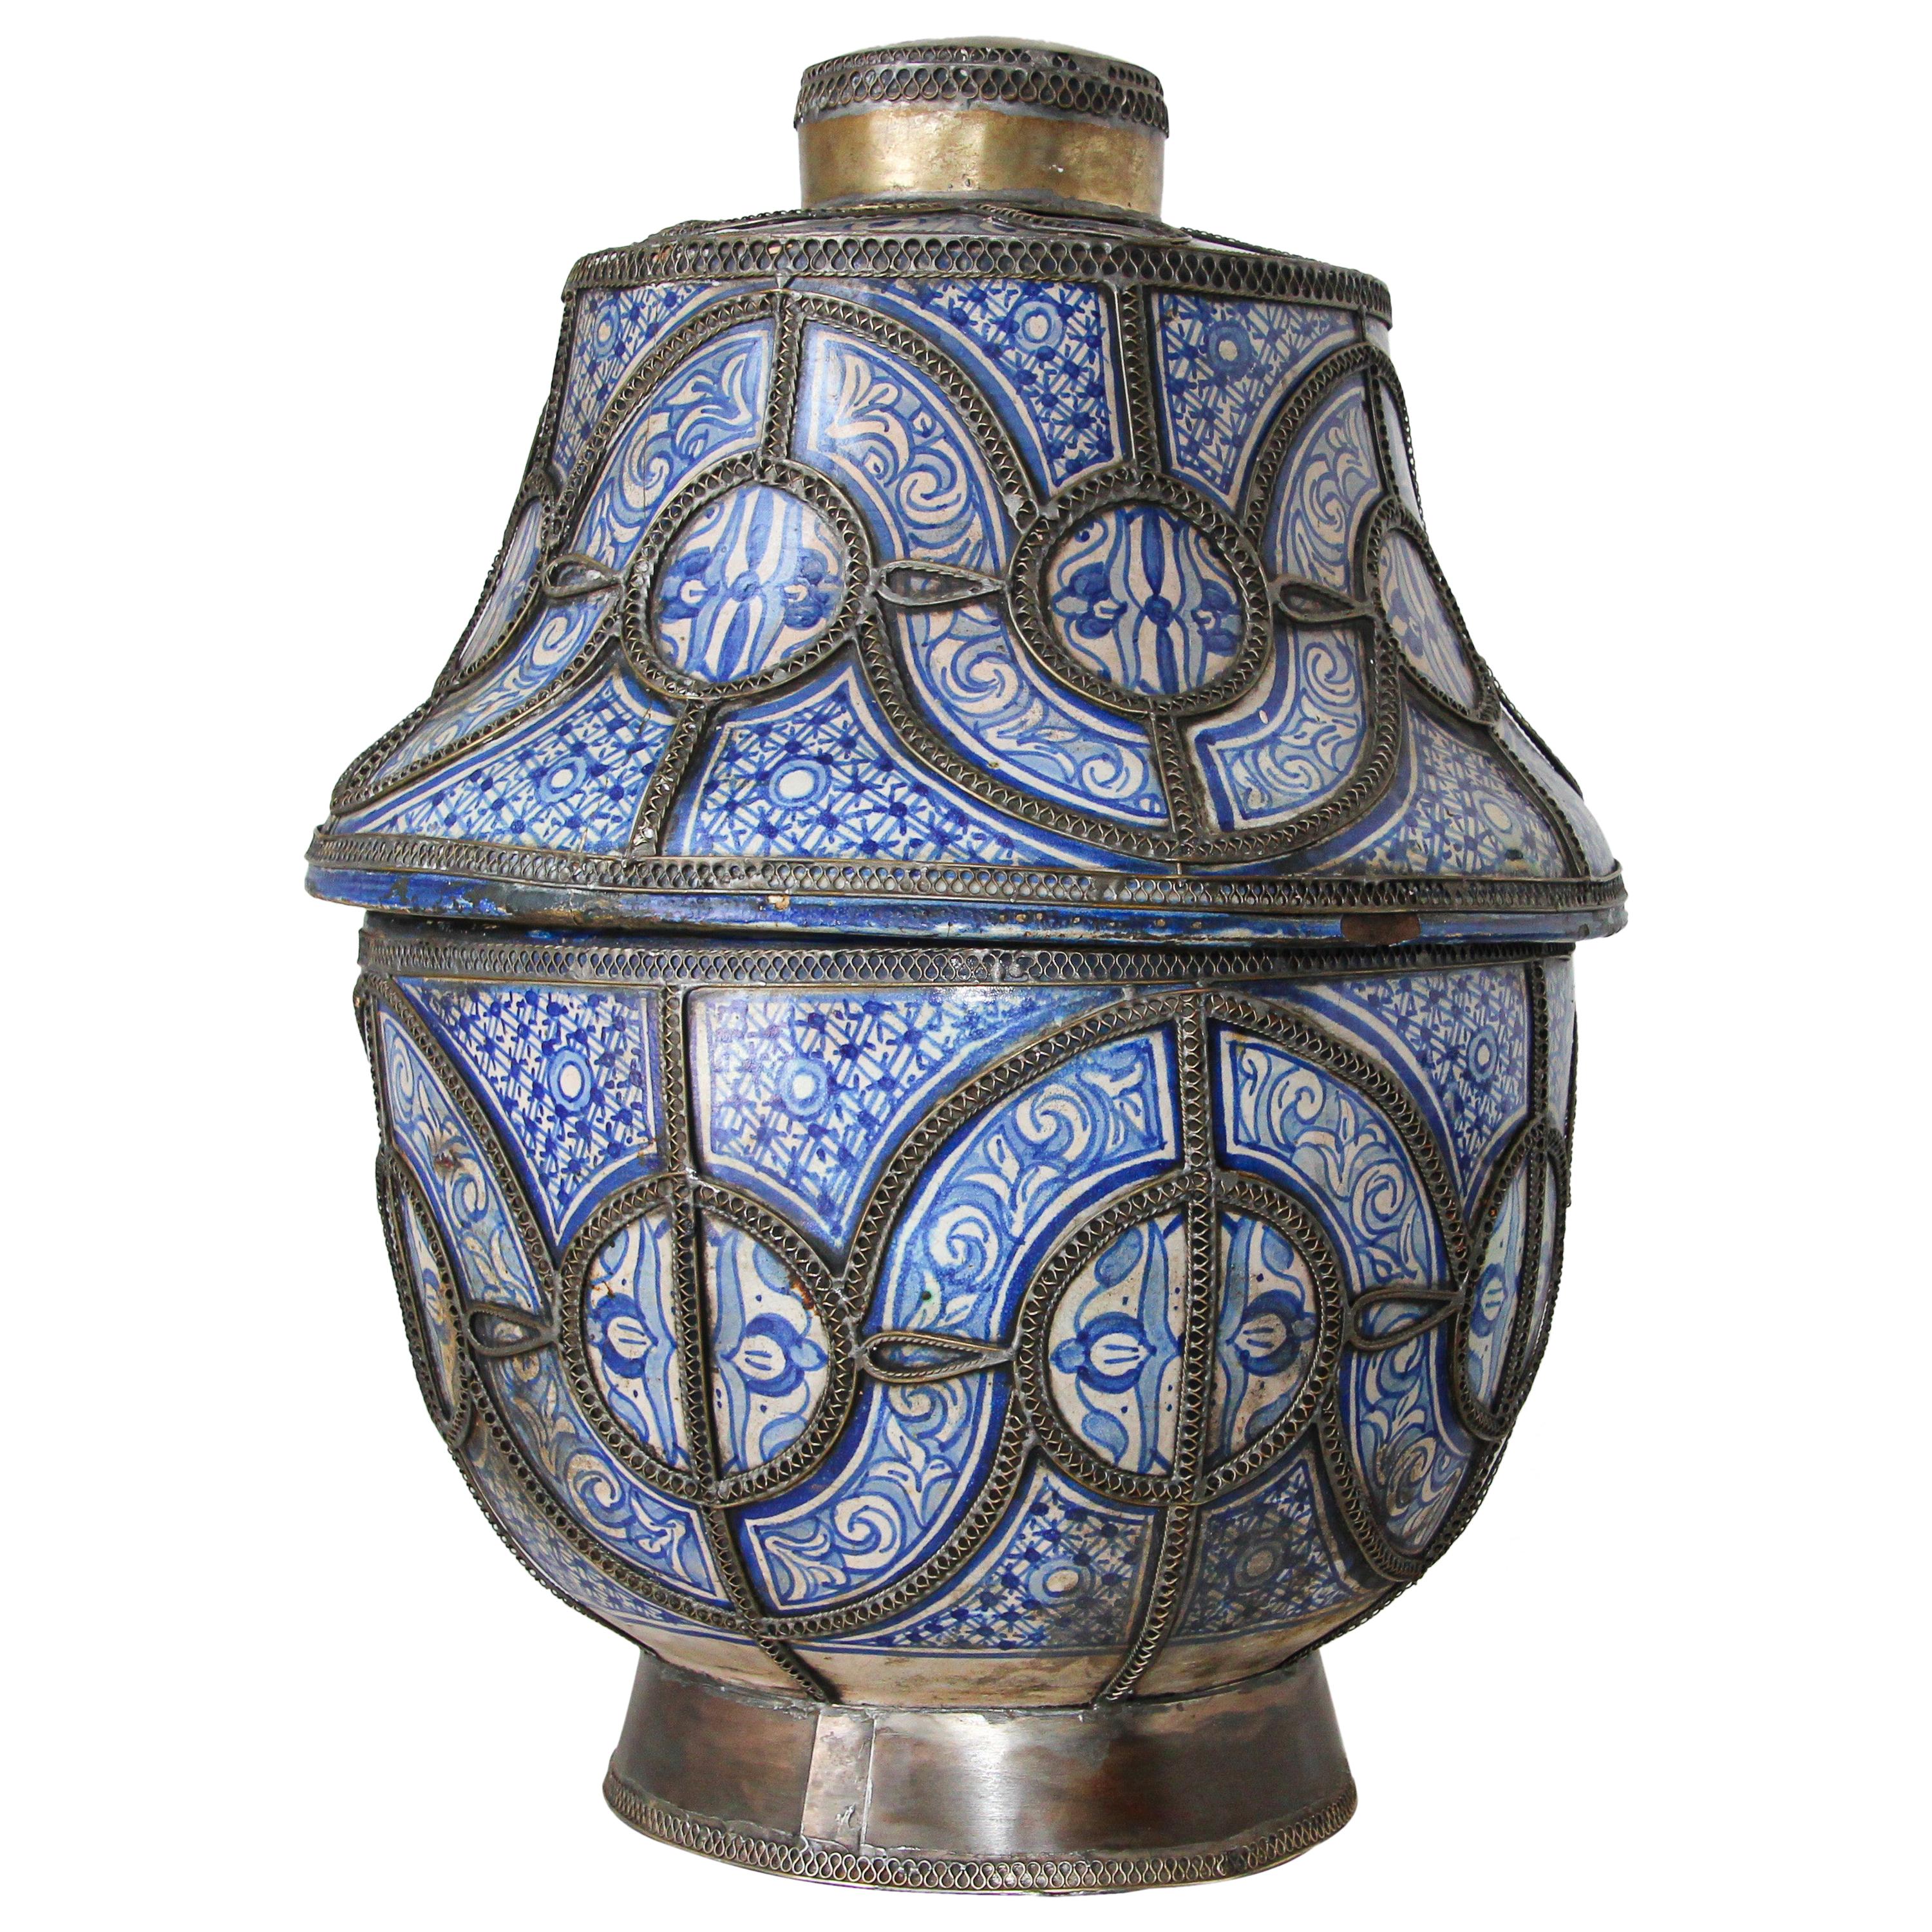 Large Moorish Moroccan Blue and White Ceramic Footed Lidded Jar from Fez